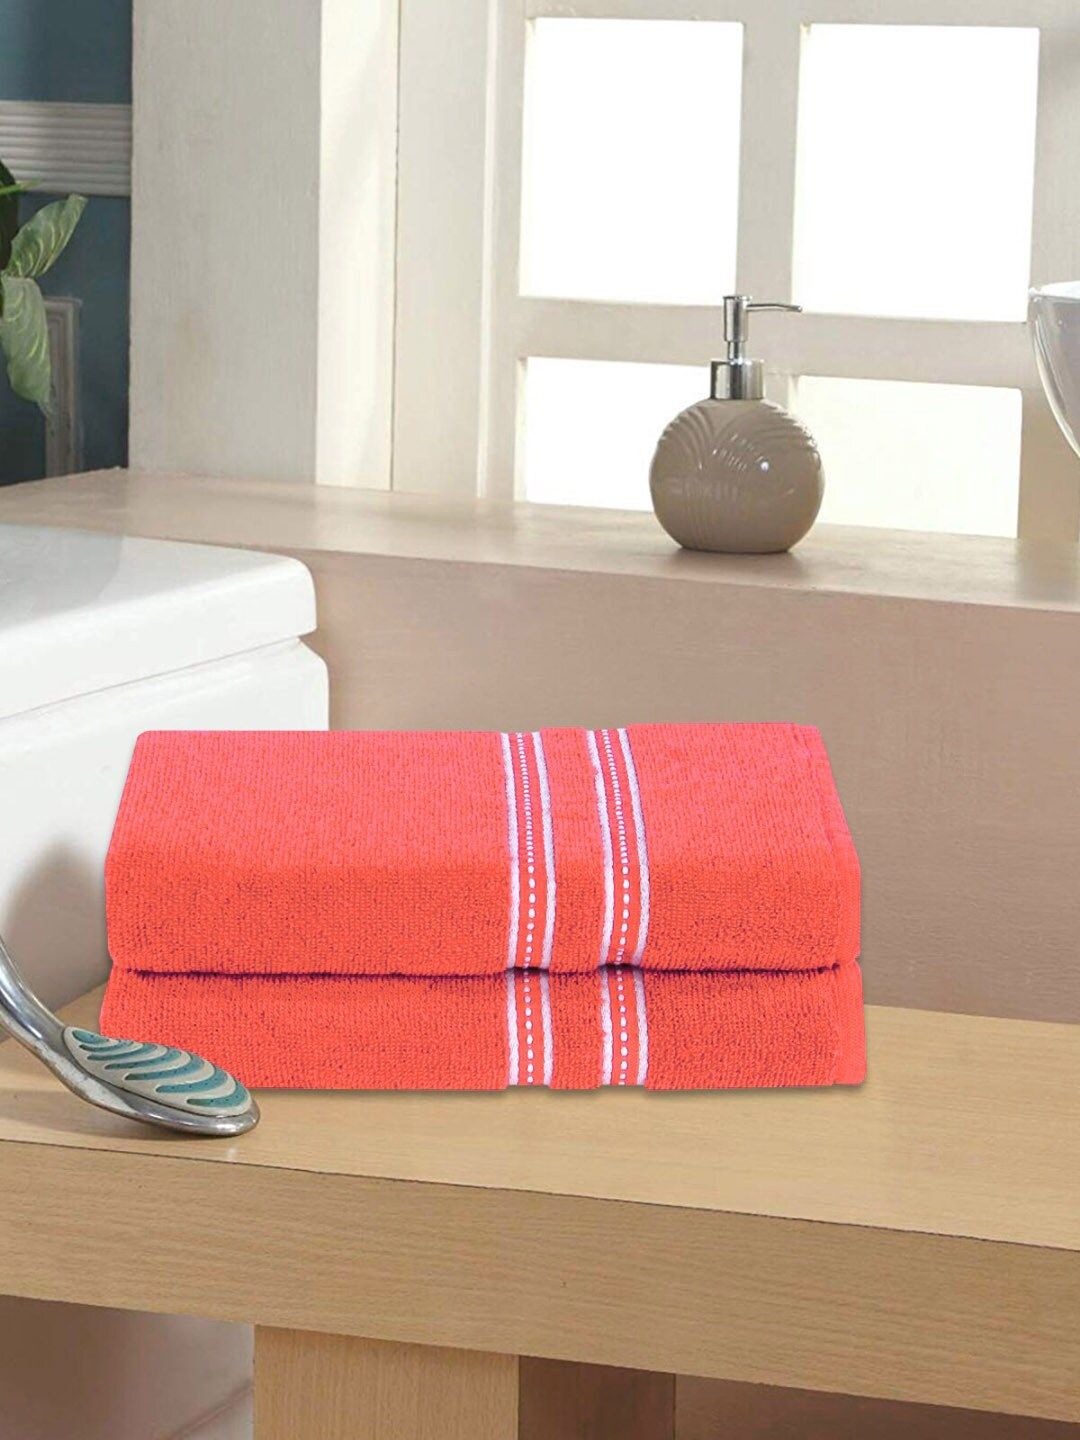 ROMEE Unisex Set of 2 Red Solid 400 GSM Large Cotton Bath Towels Price in India